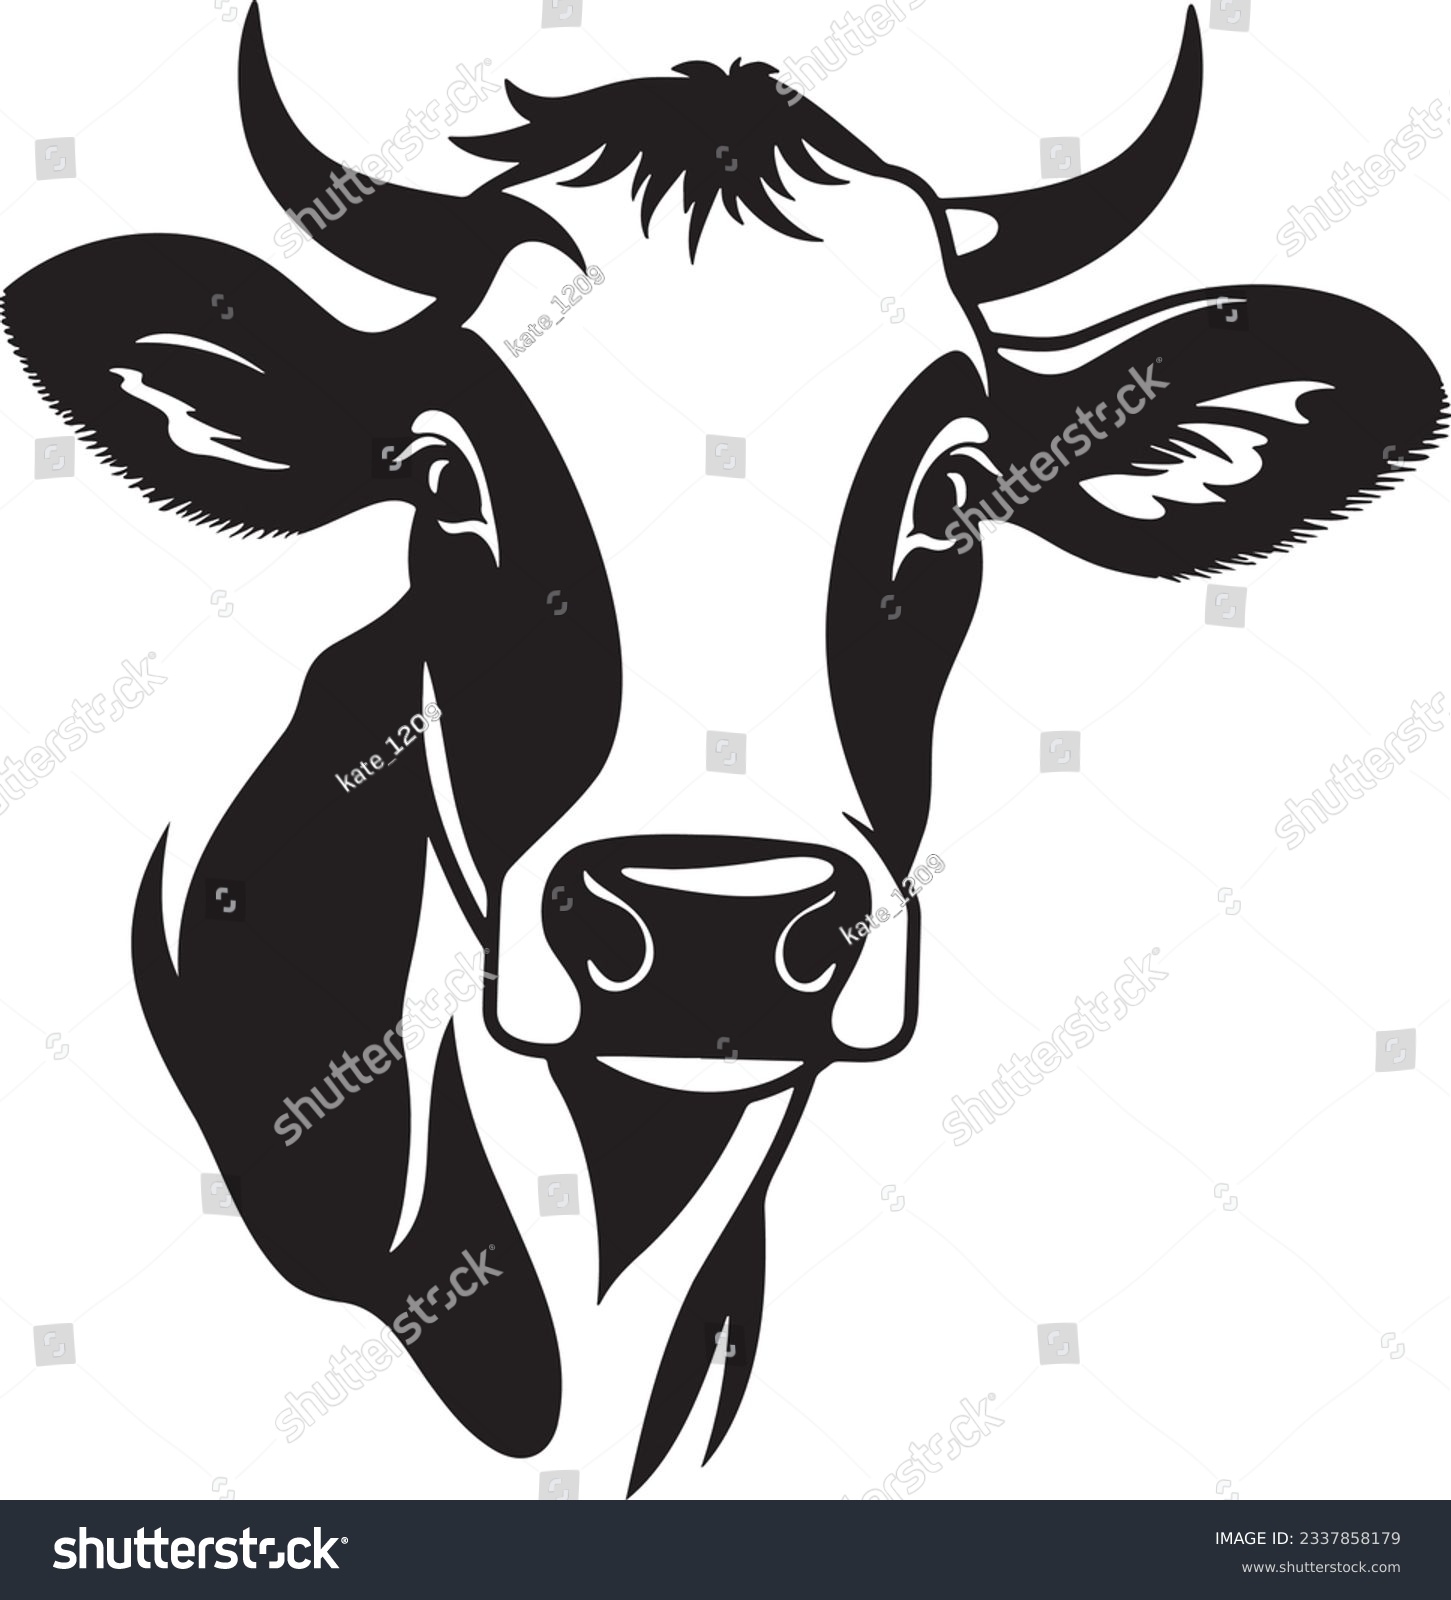 SVG of Cow with a bell around its neck, Basic simple Minimalist vector graphic, isolated on white background, black and white svg